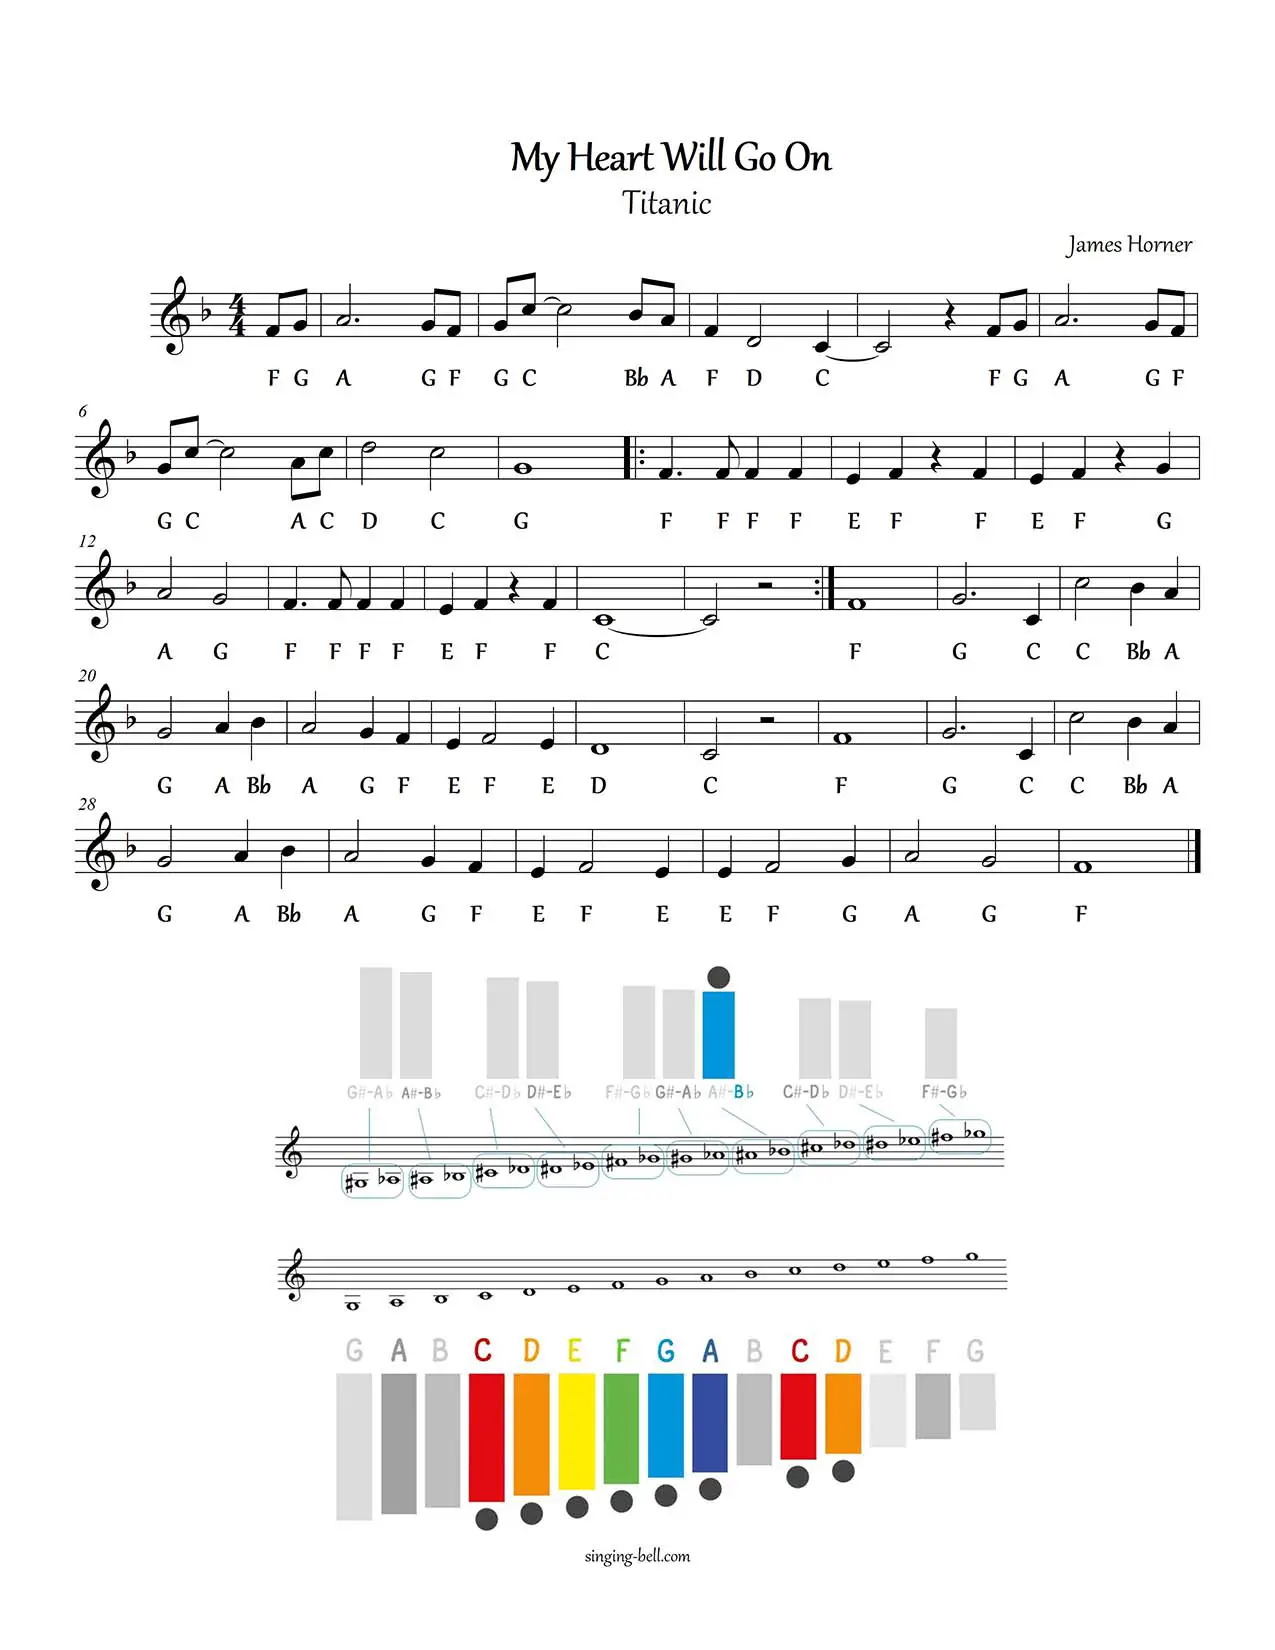 Titanic My Heart Will Go On free xylophone glockenspiel sheet music notes chart pdf